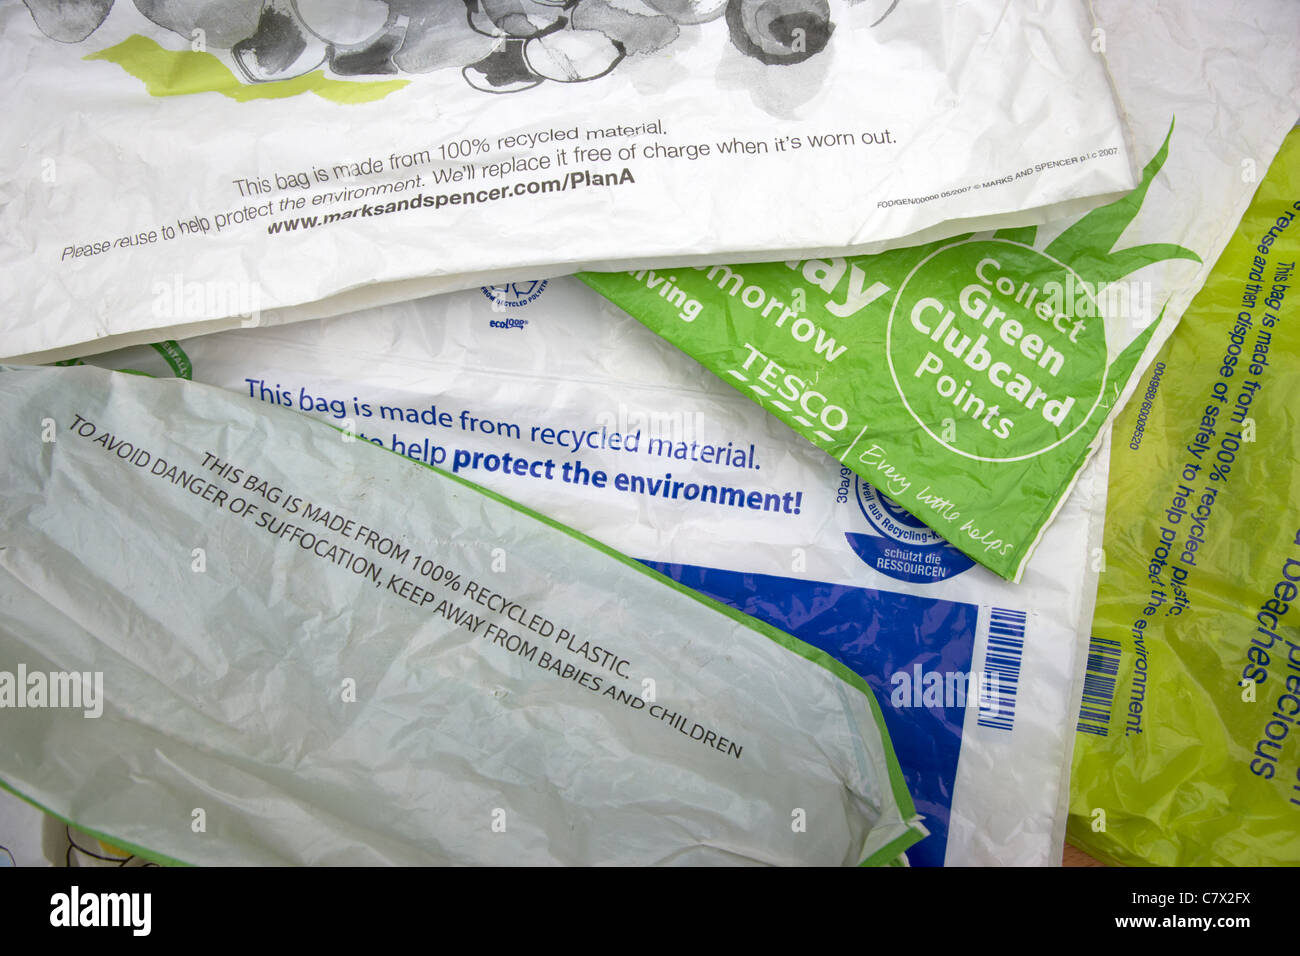 range of plastic shopping carrier bags made from recycled plastic material Stock Photo